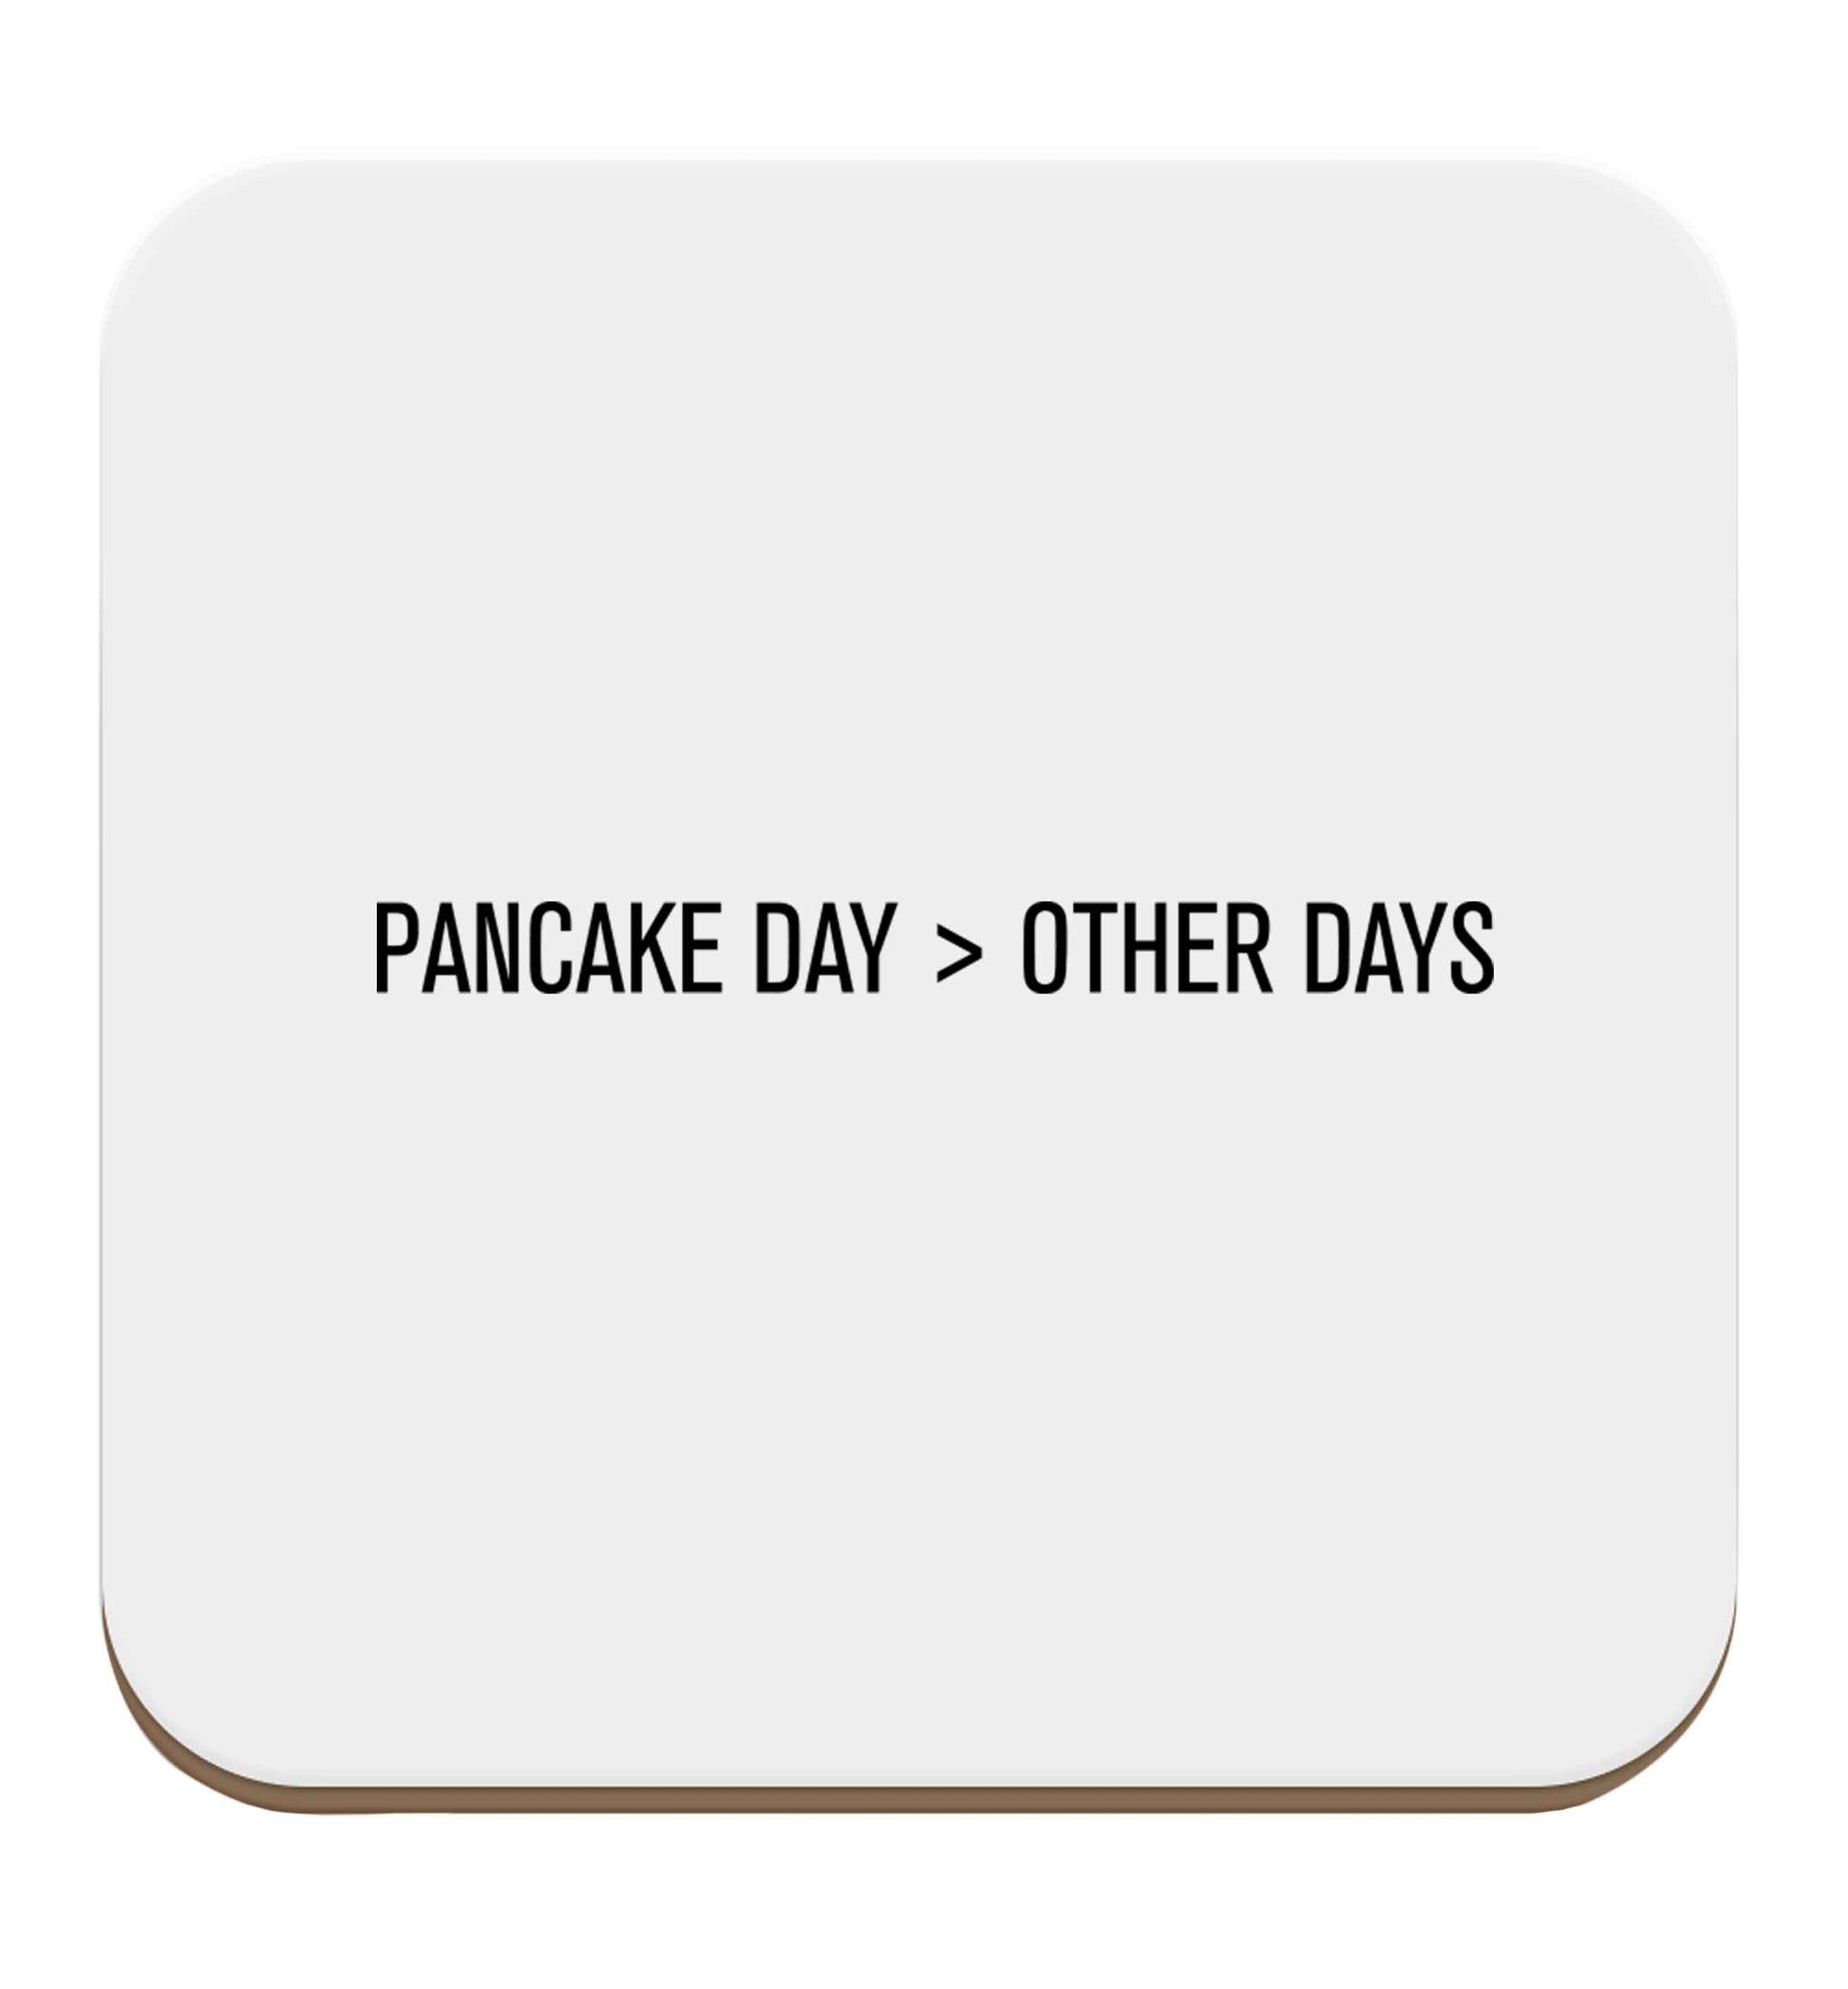 Pancake day > other days set of four coasters